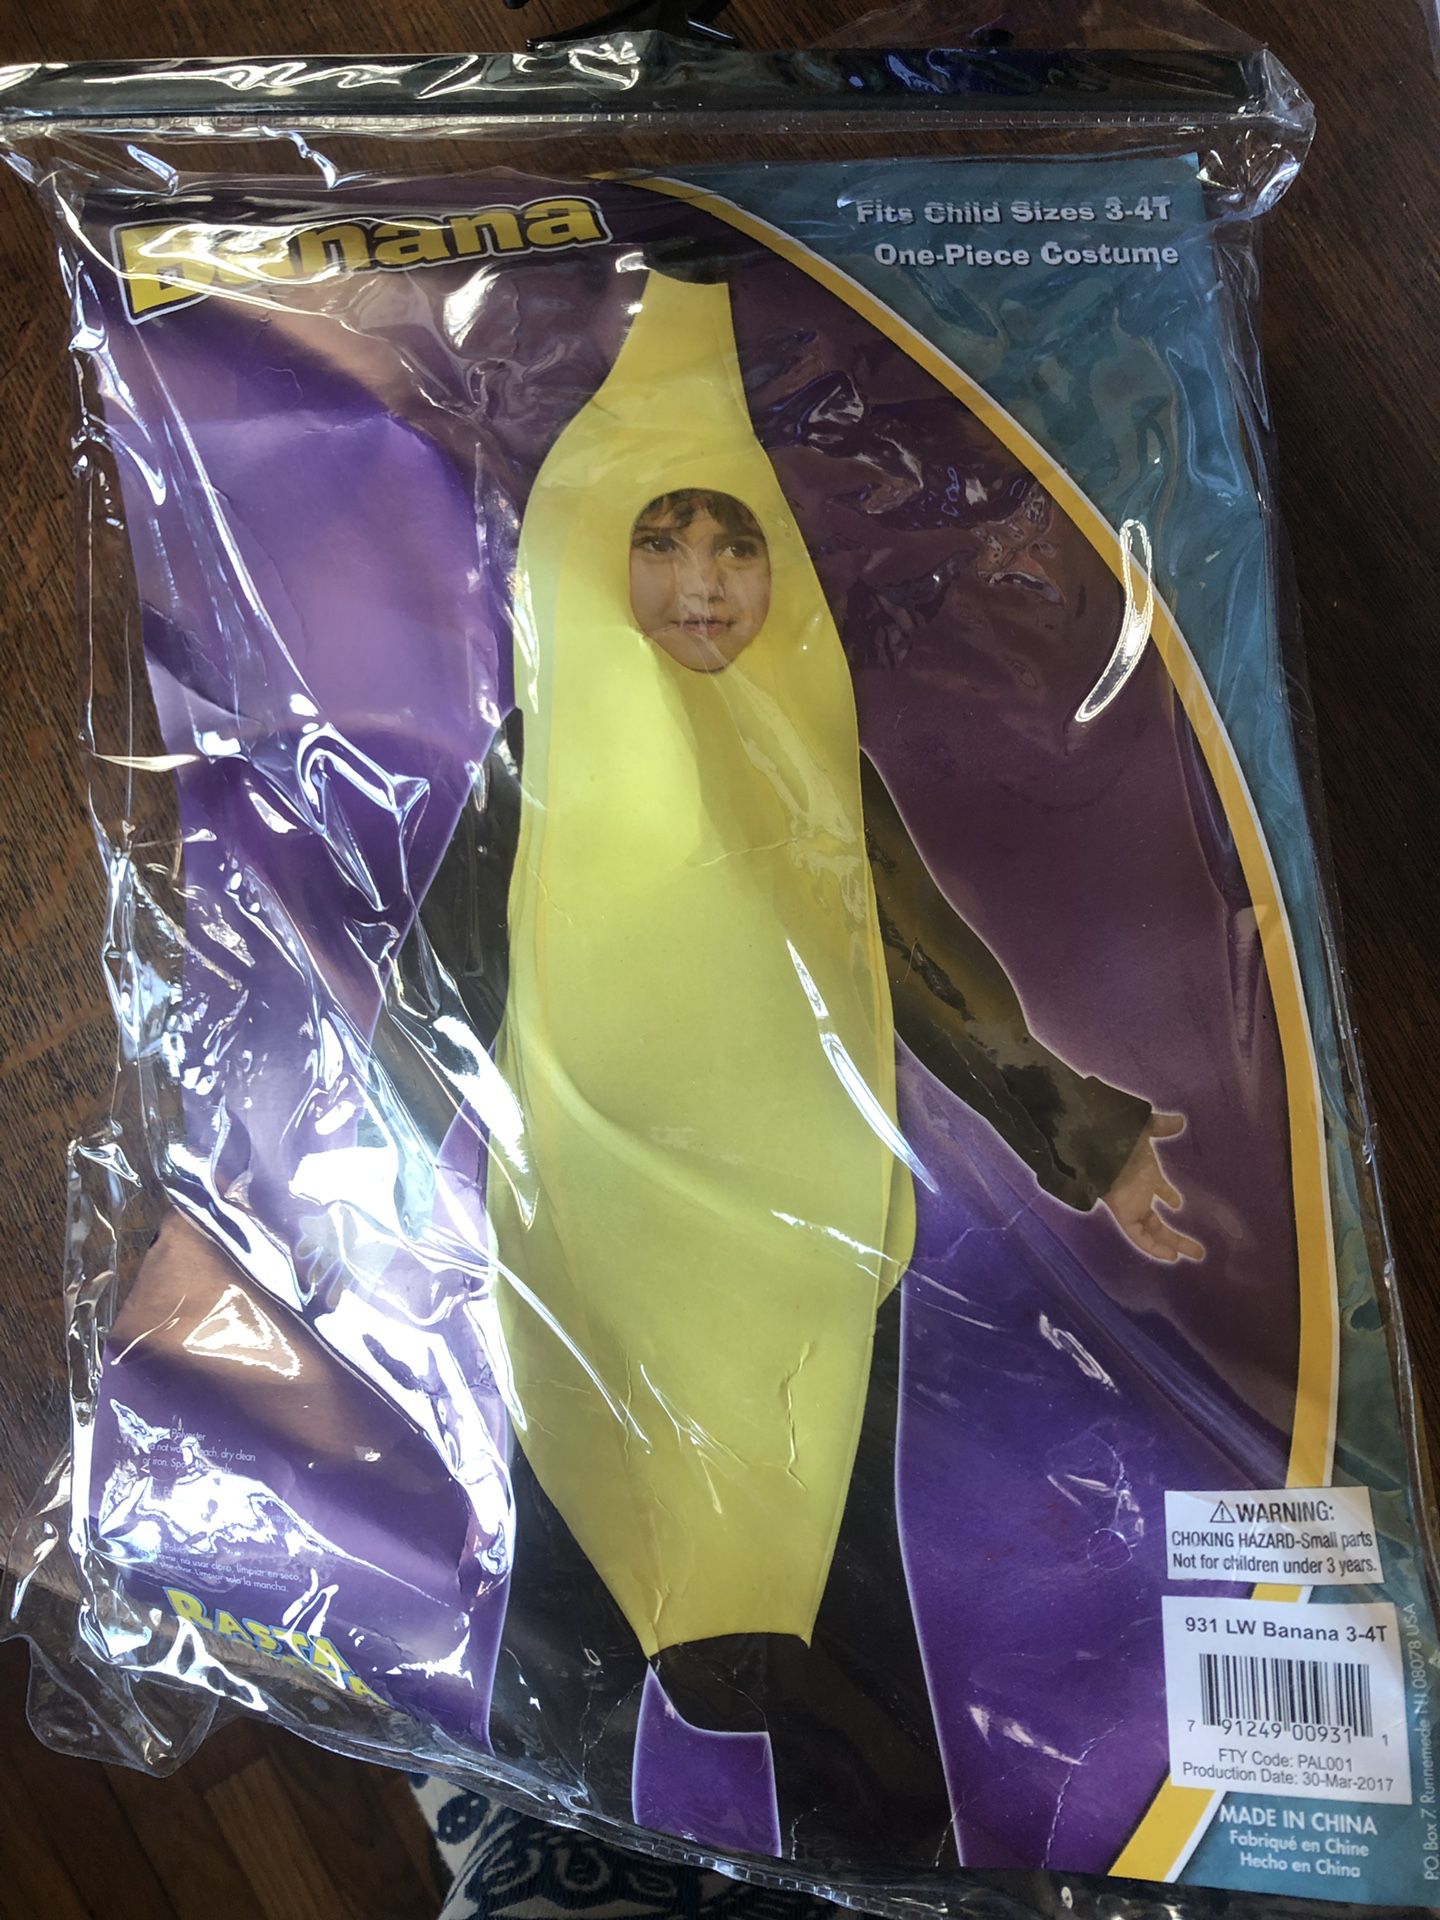 3t-4t banana costume - never used